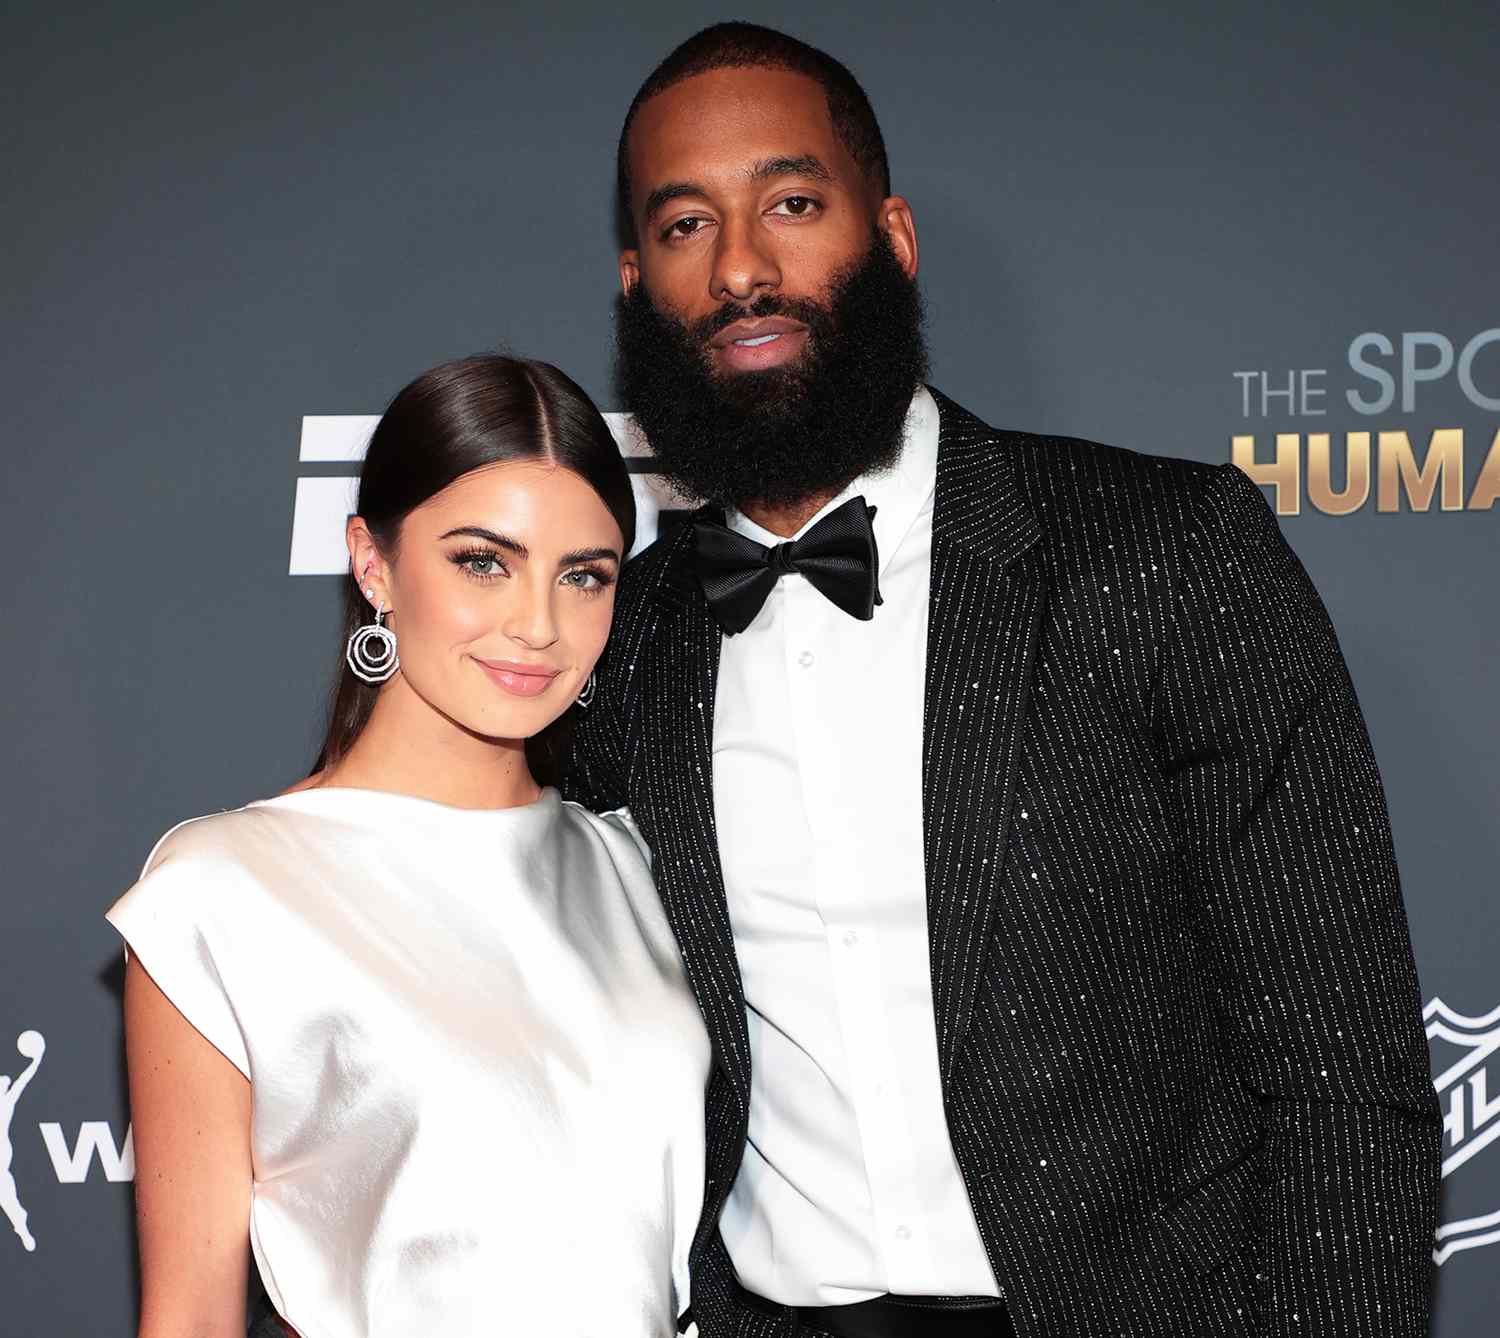 Rachael Kirkconnell and Matt James attend the 2021 Sports Humanitarian Awards on July 12, 2021 in New York City.